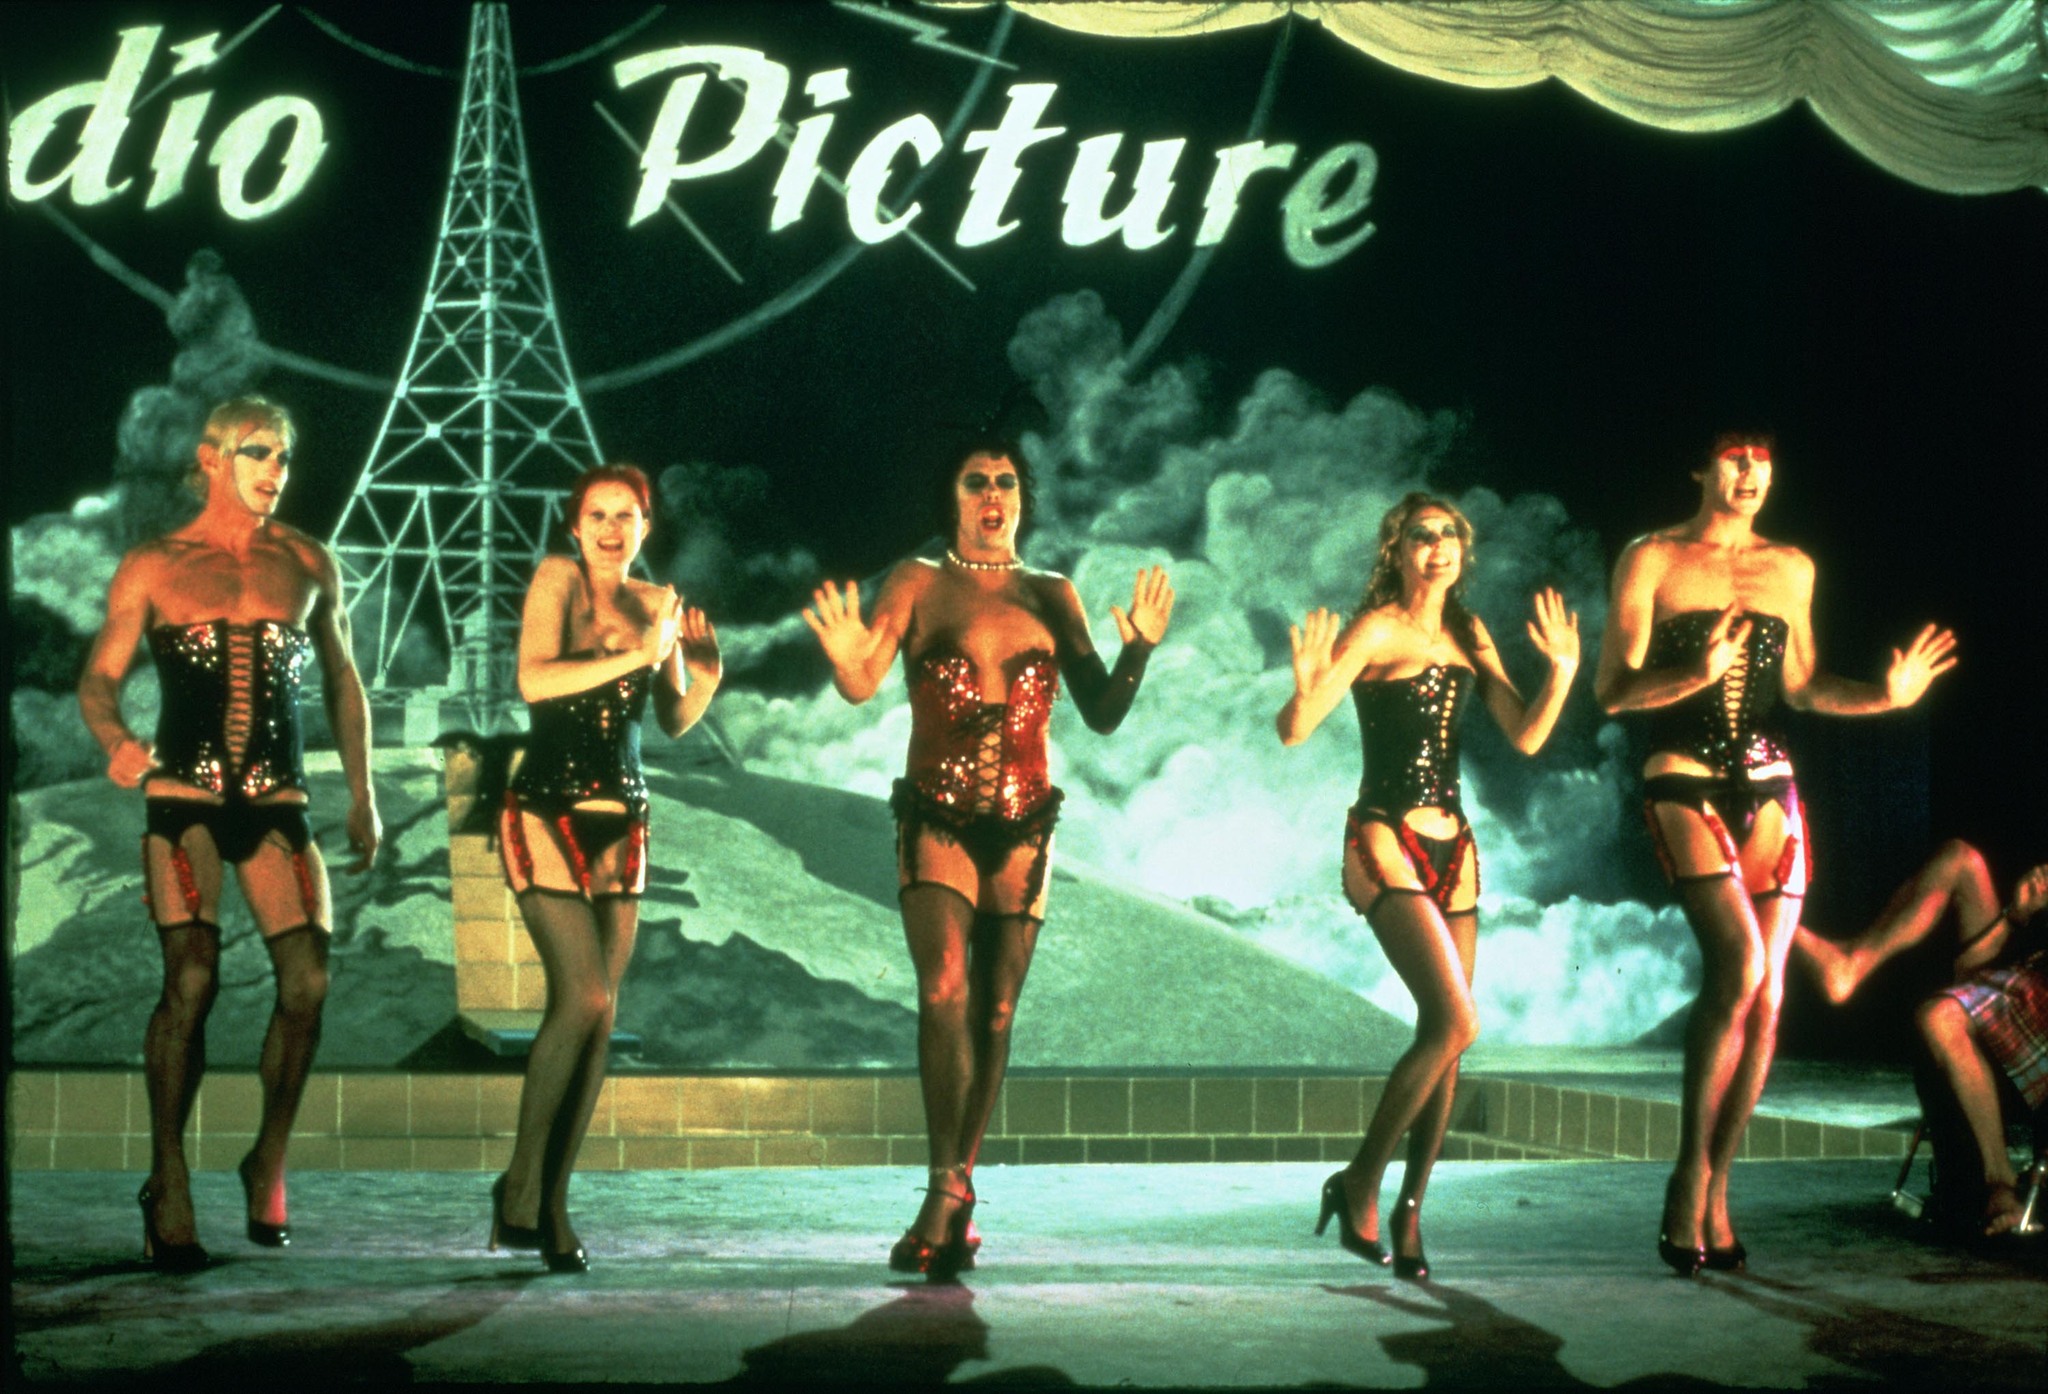 Still of Susan Sarandon, Tim Curry, Barry Bostwick, Nell Campbell and Peter Hinwood in The Rocky Horror Picture Show (1975)